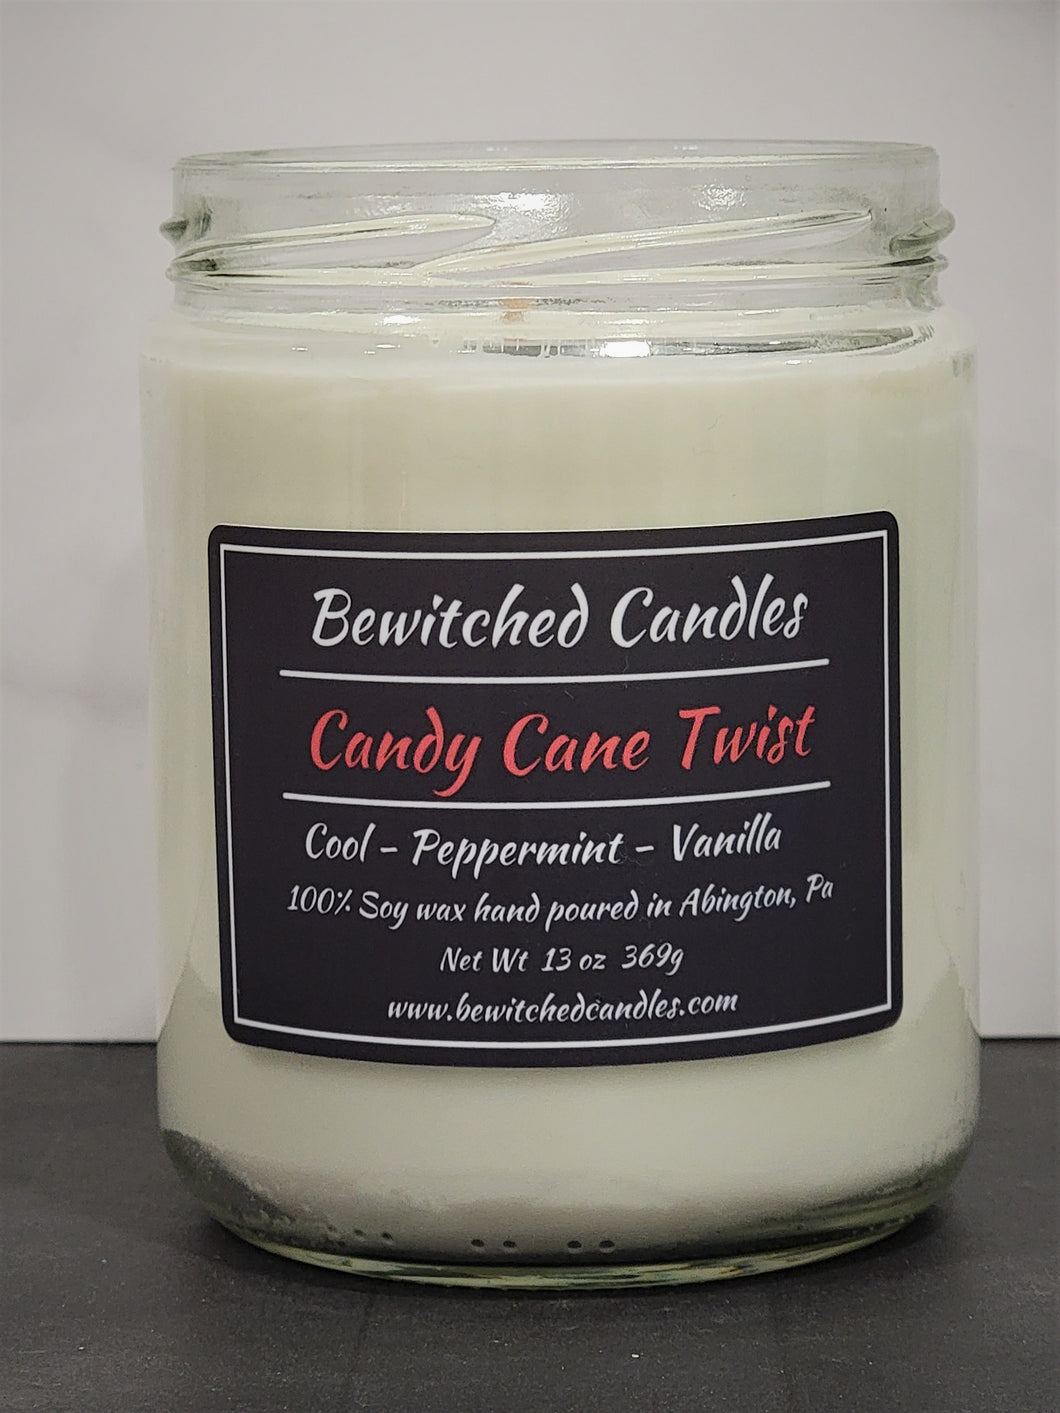 100% Soy wax candle hand poured in our USA made glass jars using premium fragrance oils cotton wicks with hints of Cool, Peppermint, Vanilla